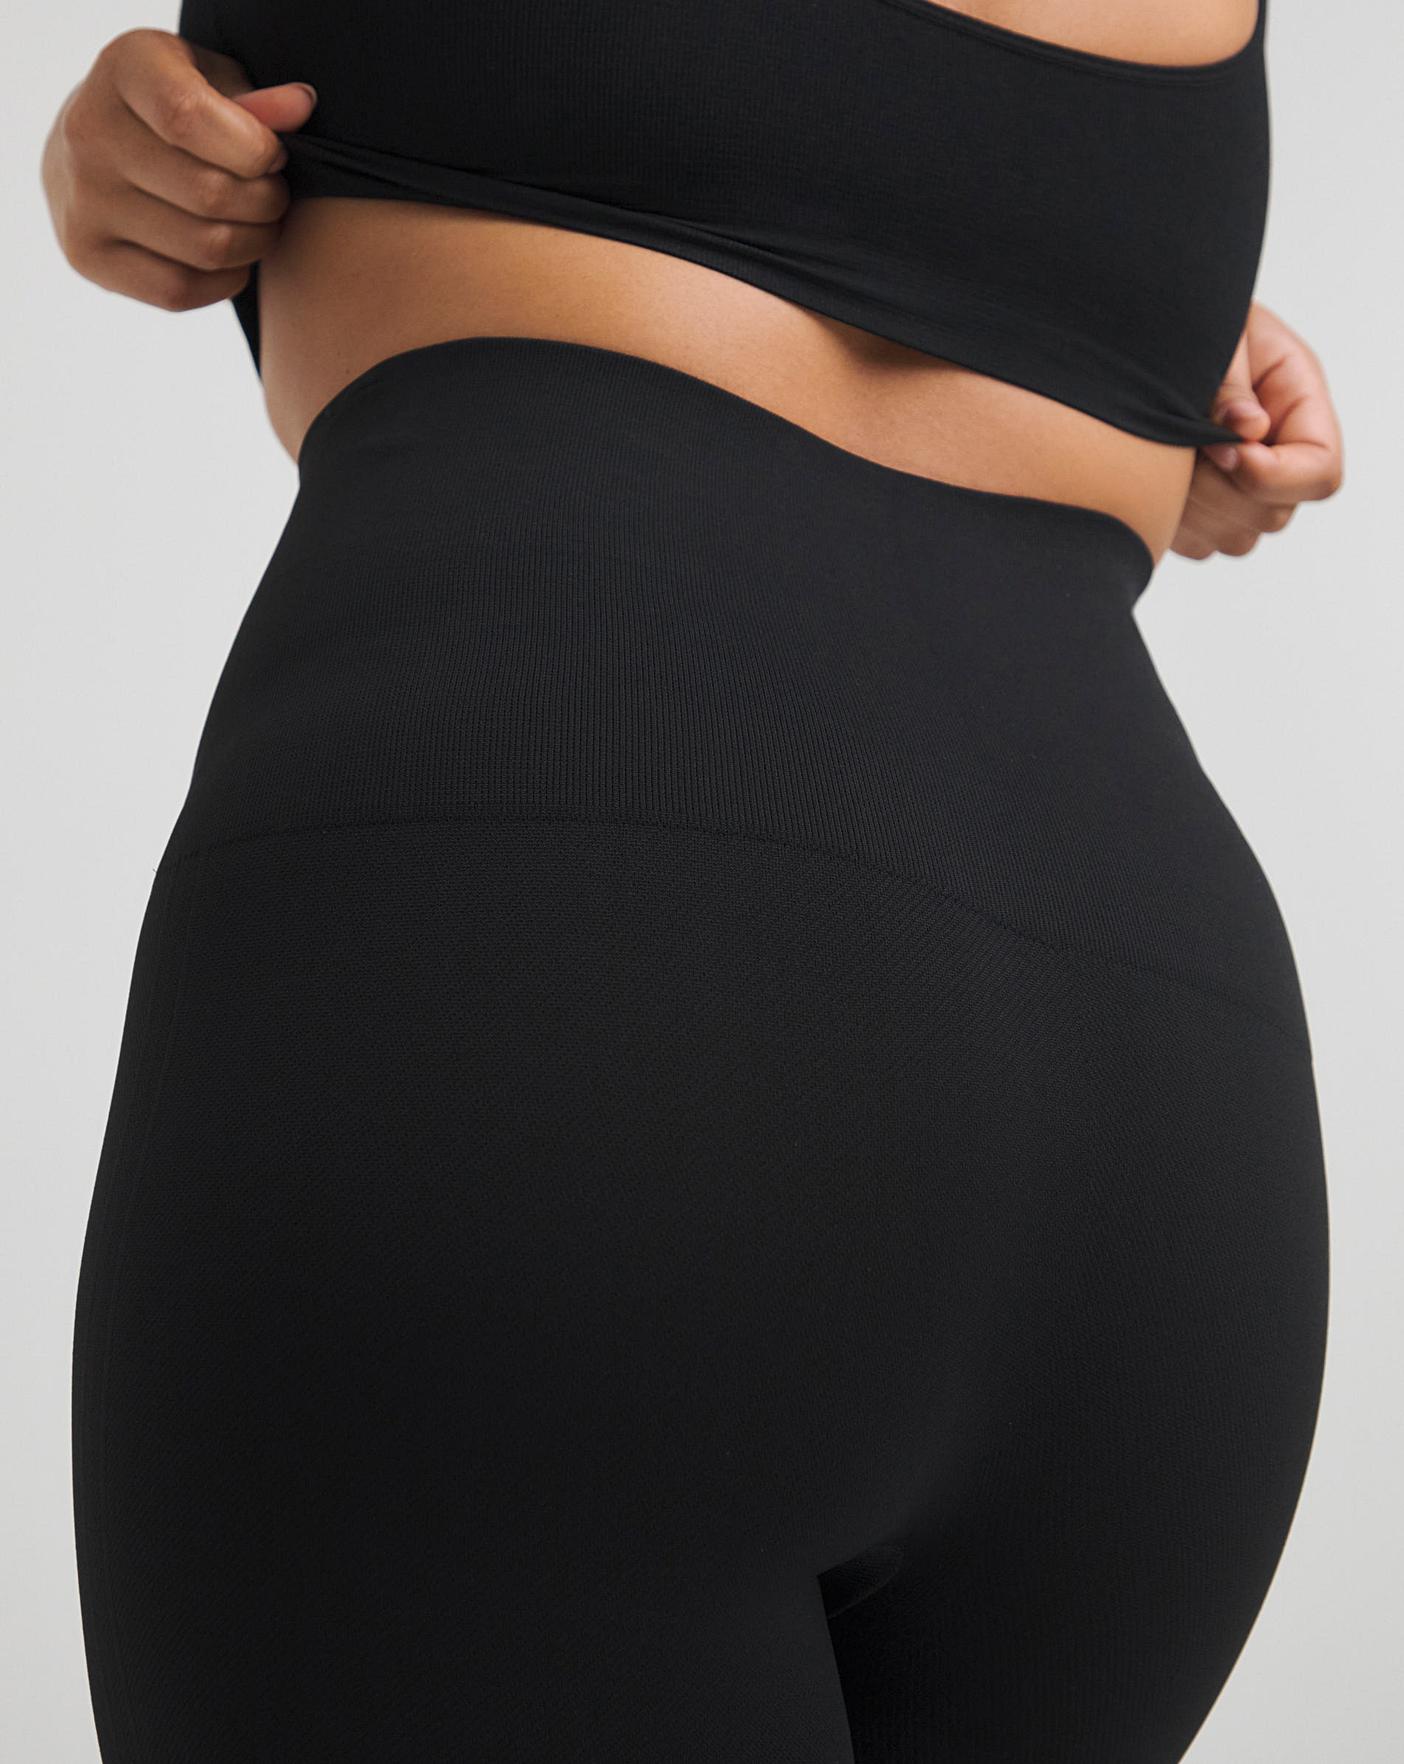 SPANX - NEW! EcoCare Seamless Leggings are extremely flattering,  comfortable and support you AND Mother Earth. Shop our New EcoCare Seamless  Leggings